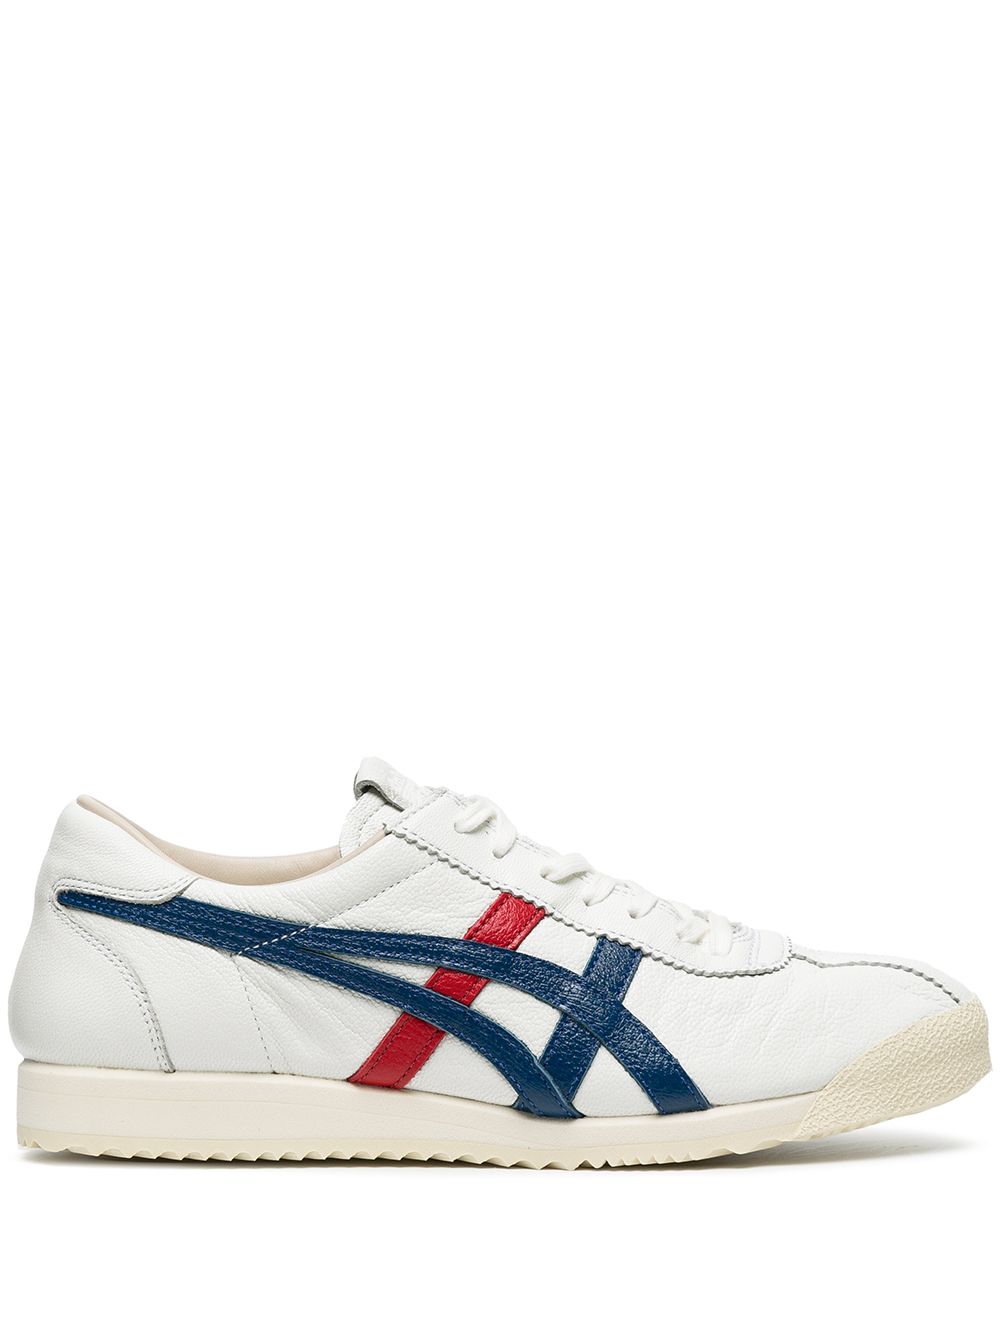 Onitsuka Tiger Tiger Corsair Deluxe low-top Sneakers - Farfetch